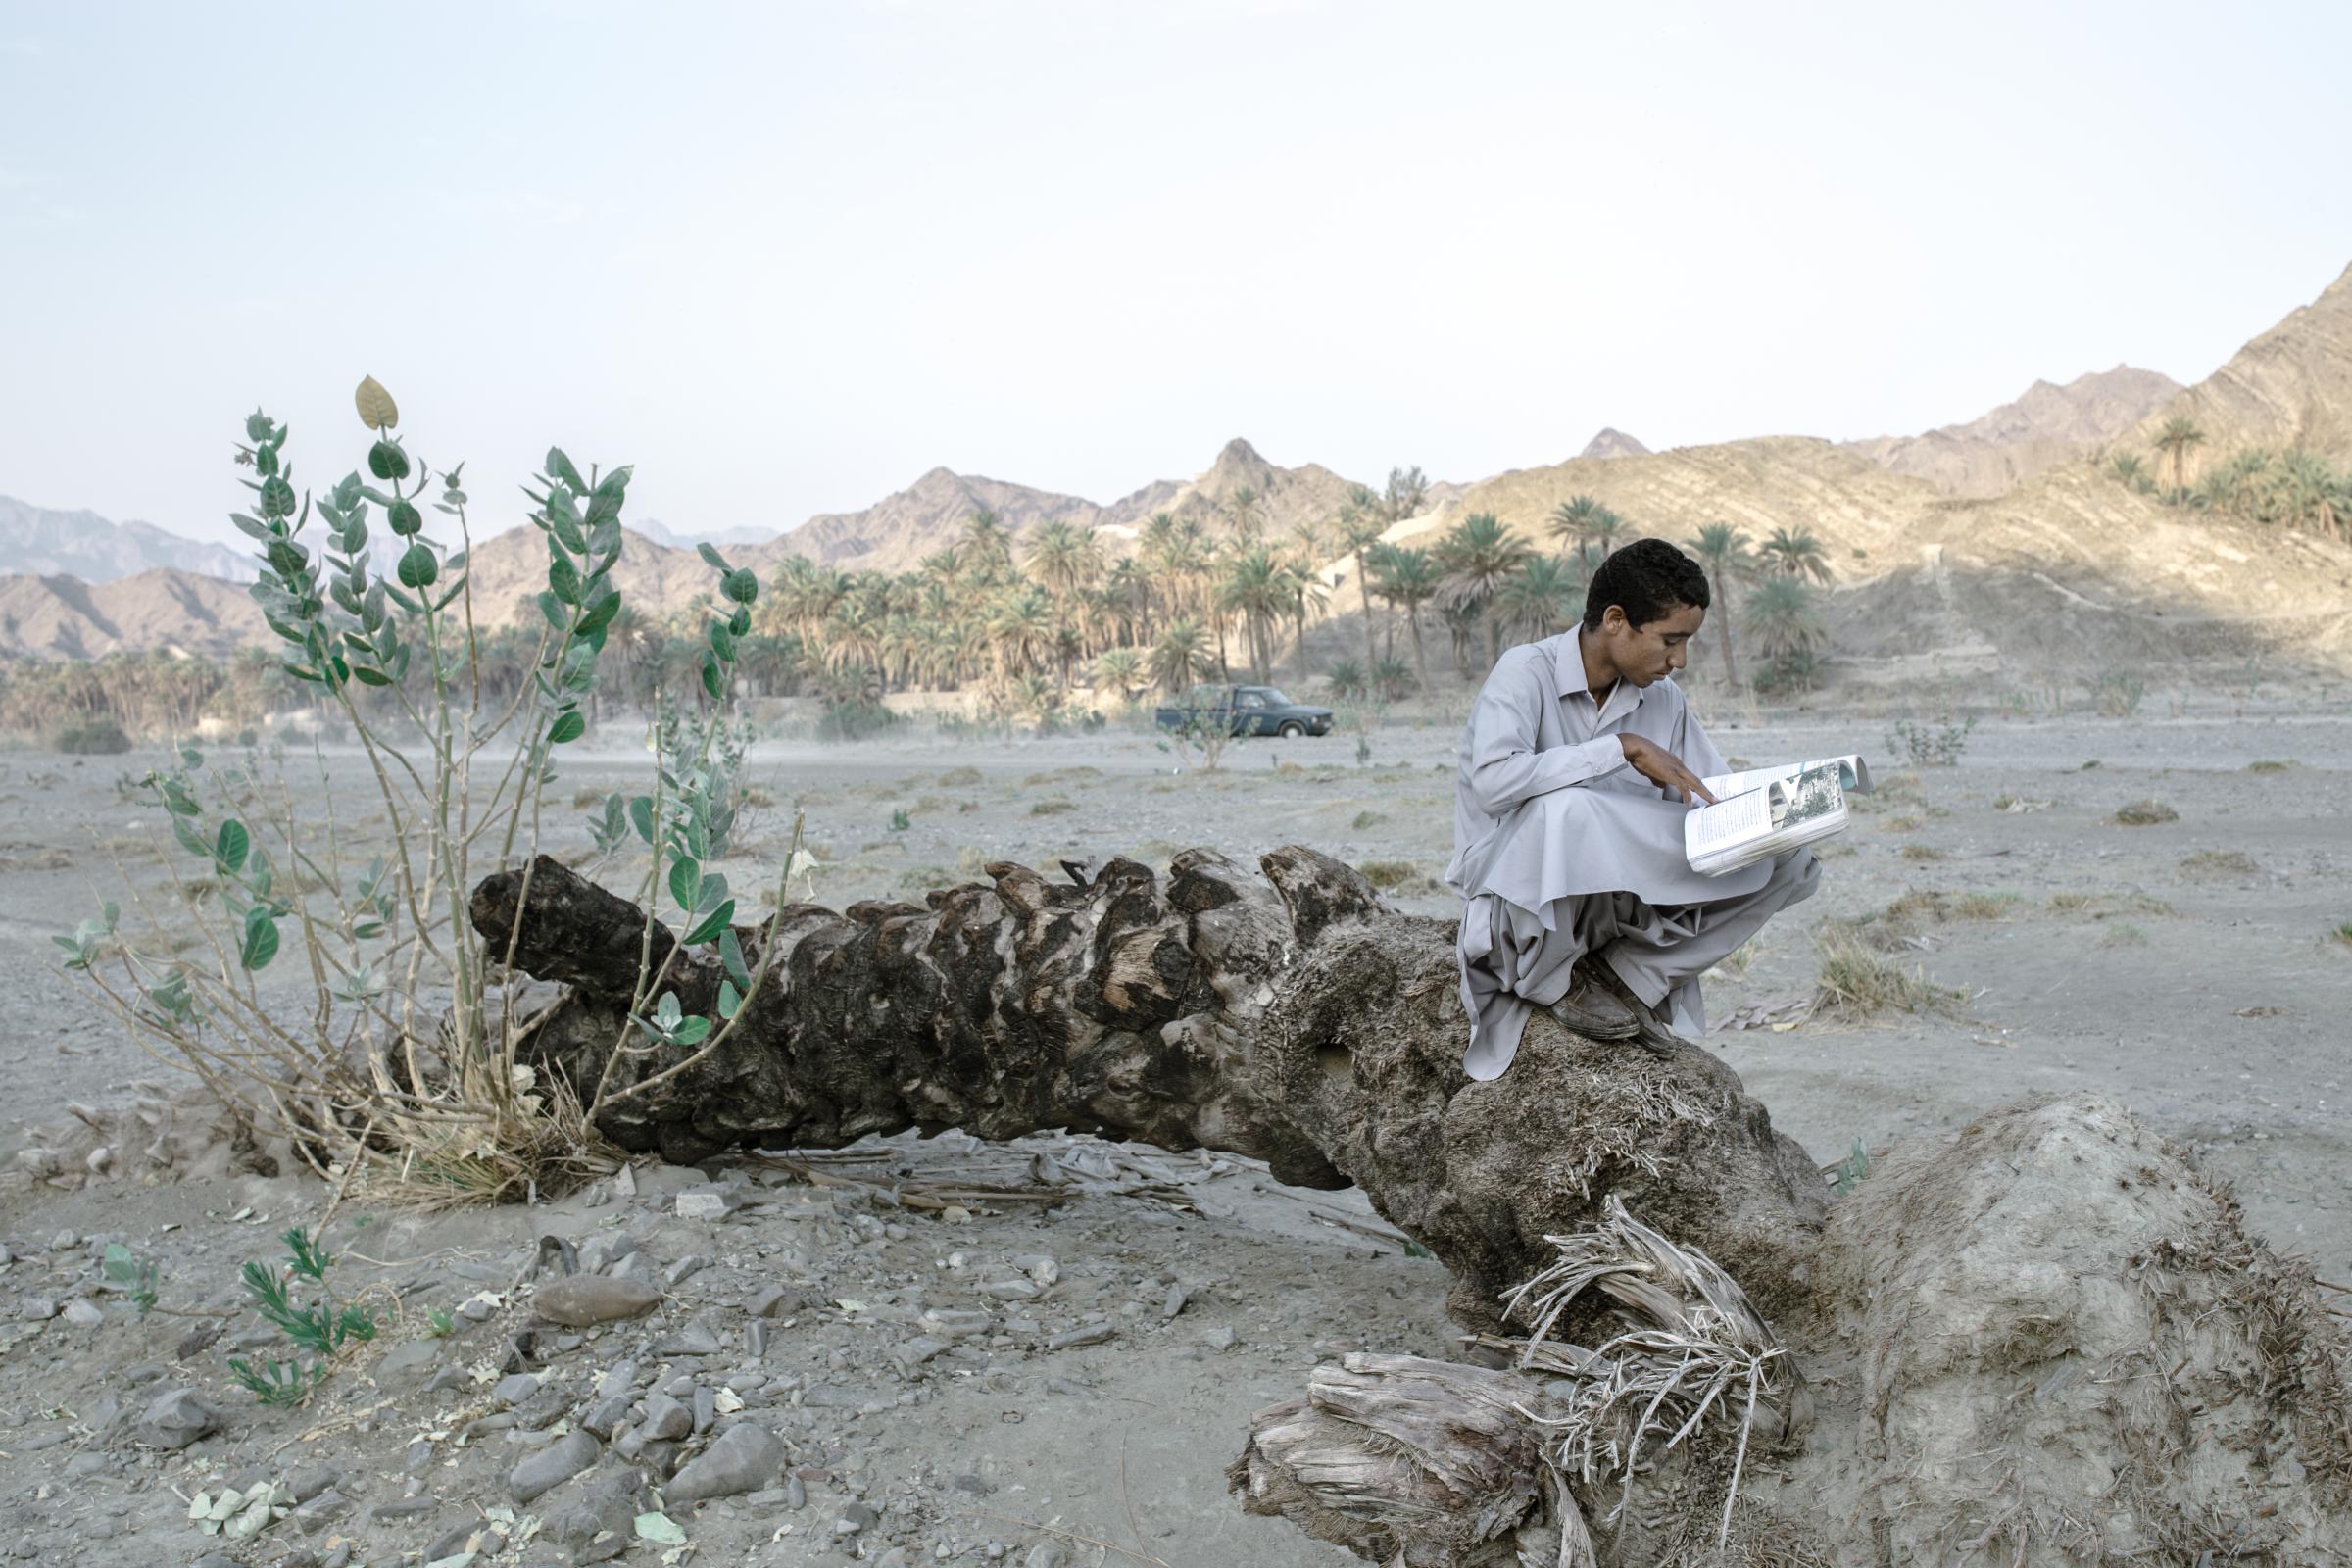 IN THE DESERT OF WETLANDS -   Miran, 17, is studying on the shoulder of the dirt road...